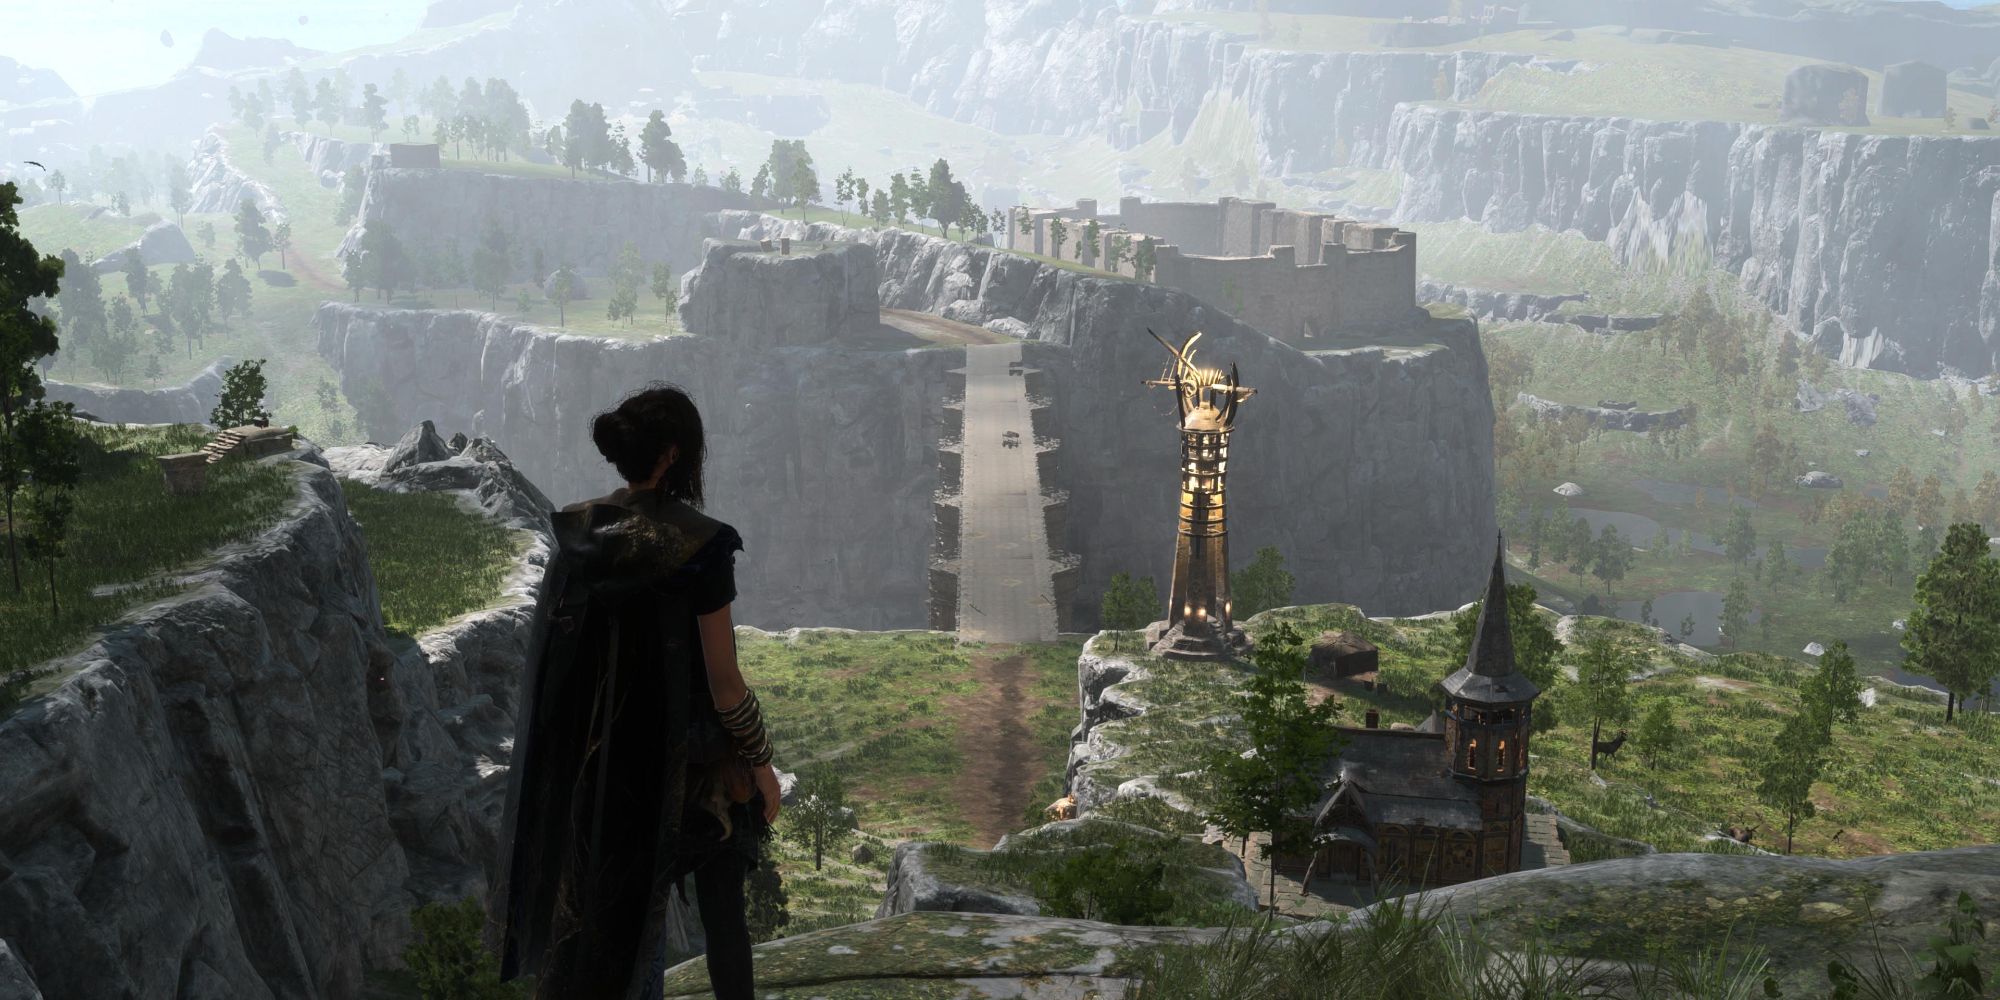 Frey Holland in Forspoken standing on the edge of a cliff looking at the landscape below. Ahead of and below her is a building with a spired tower, a golden Belfry, and a large stone bridge spanning a gorge.